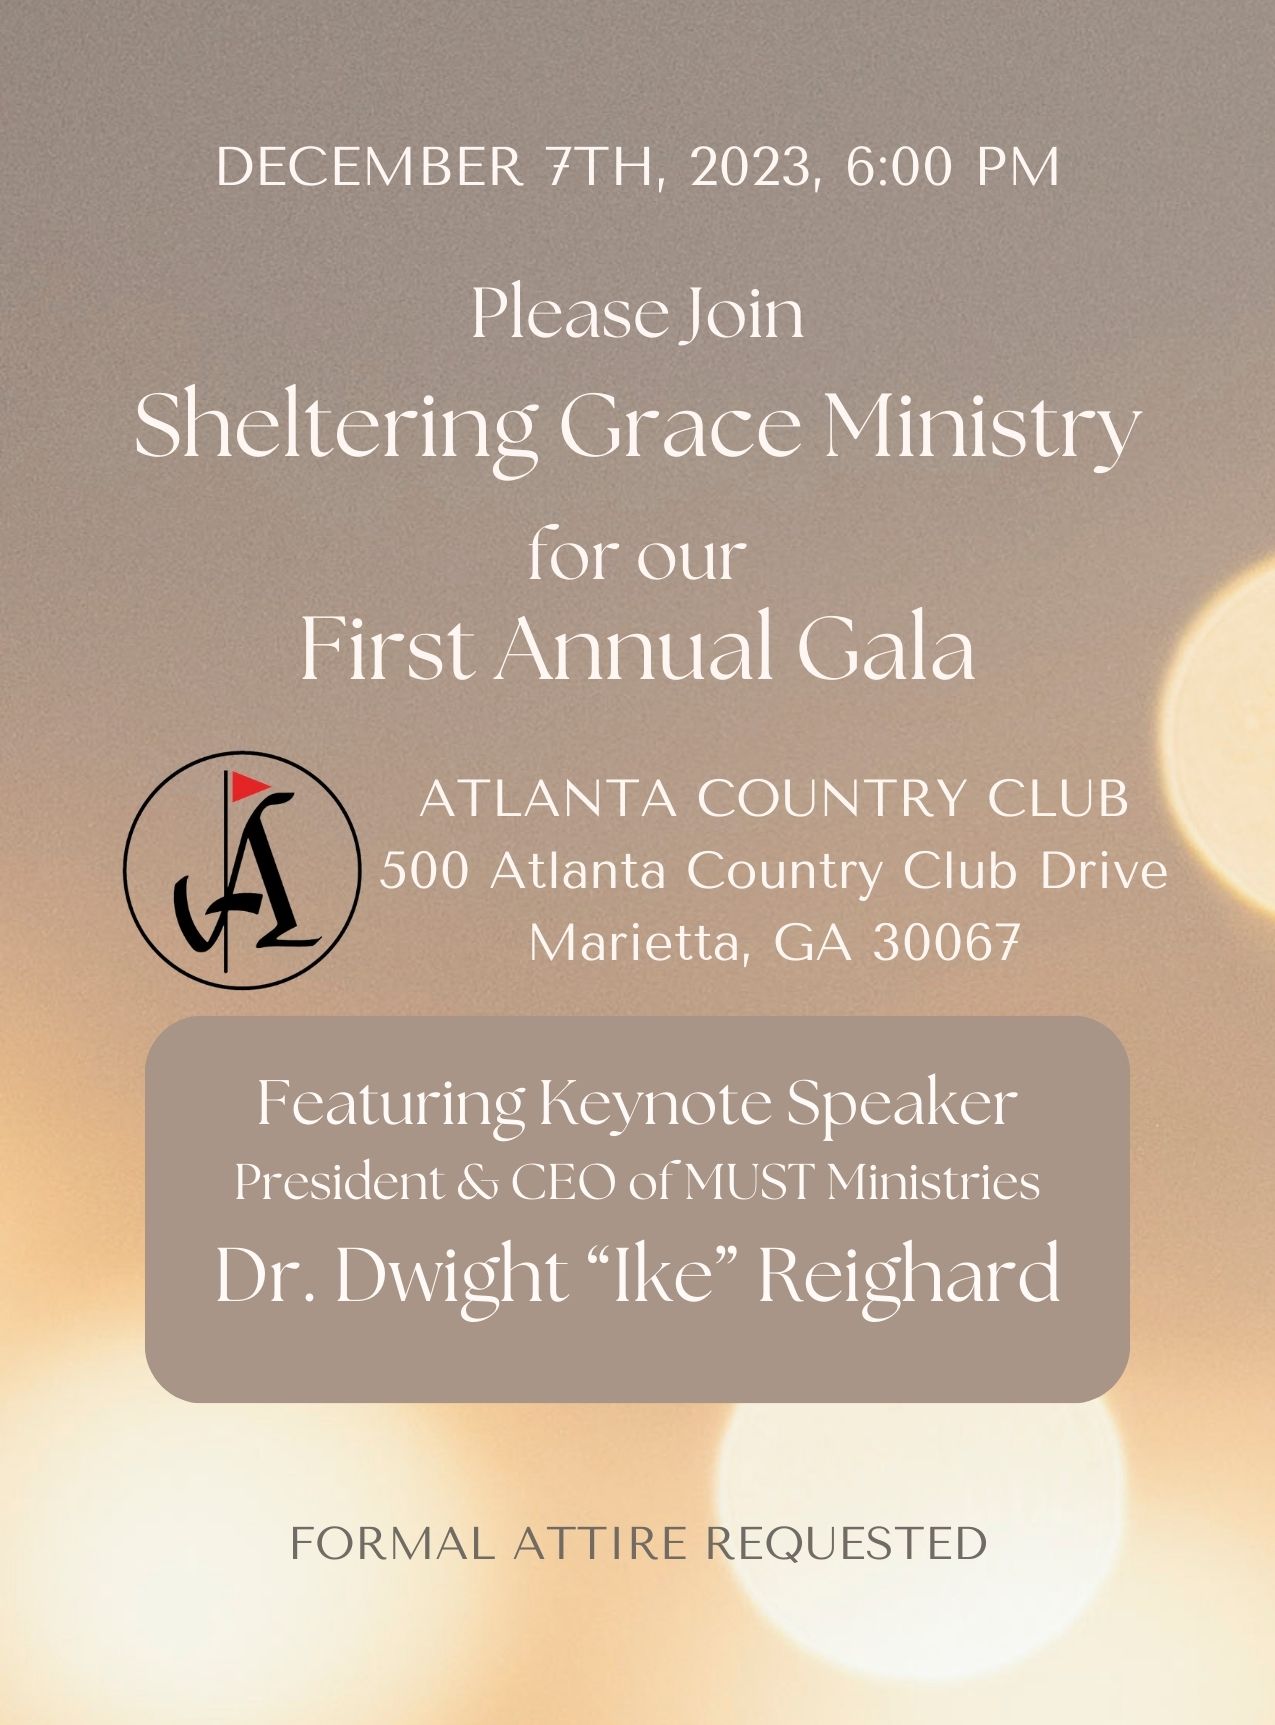 Sheltering Grace Ministry Holiday Gala